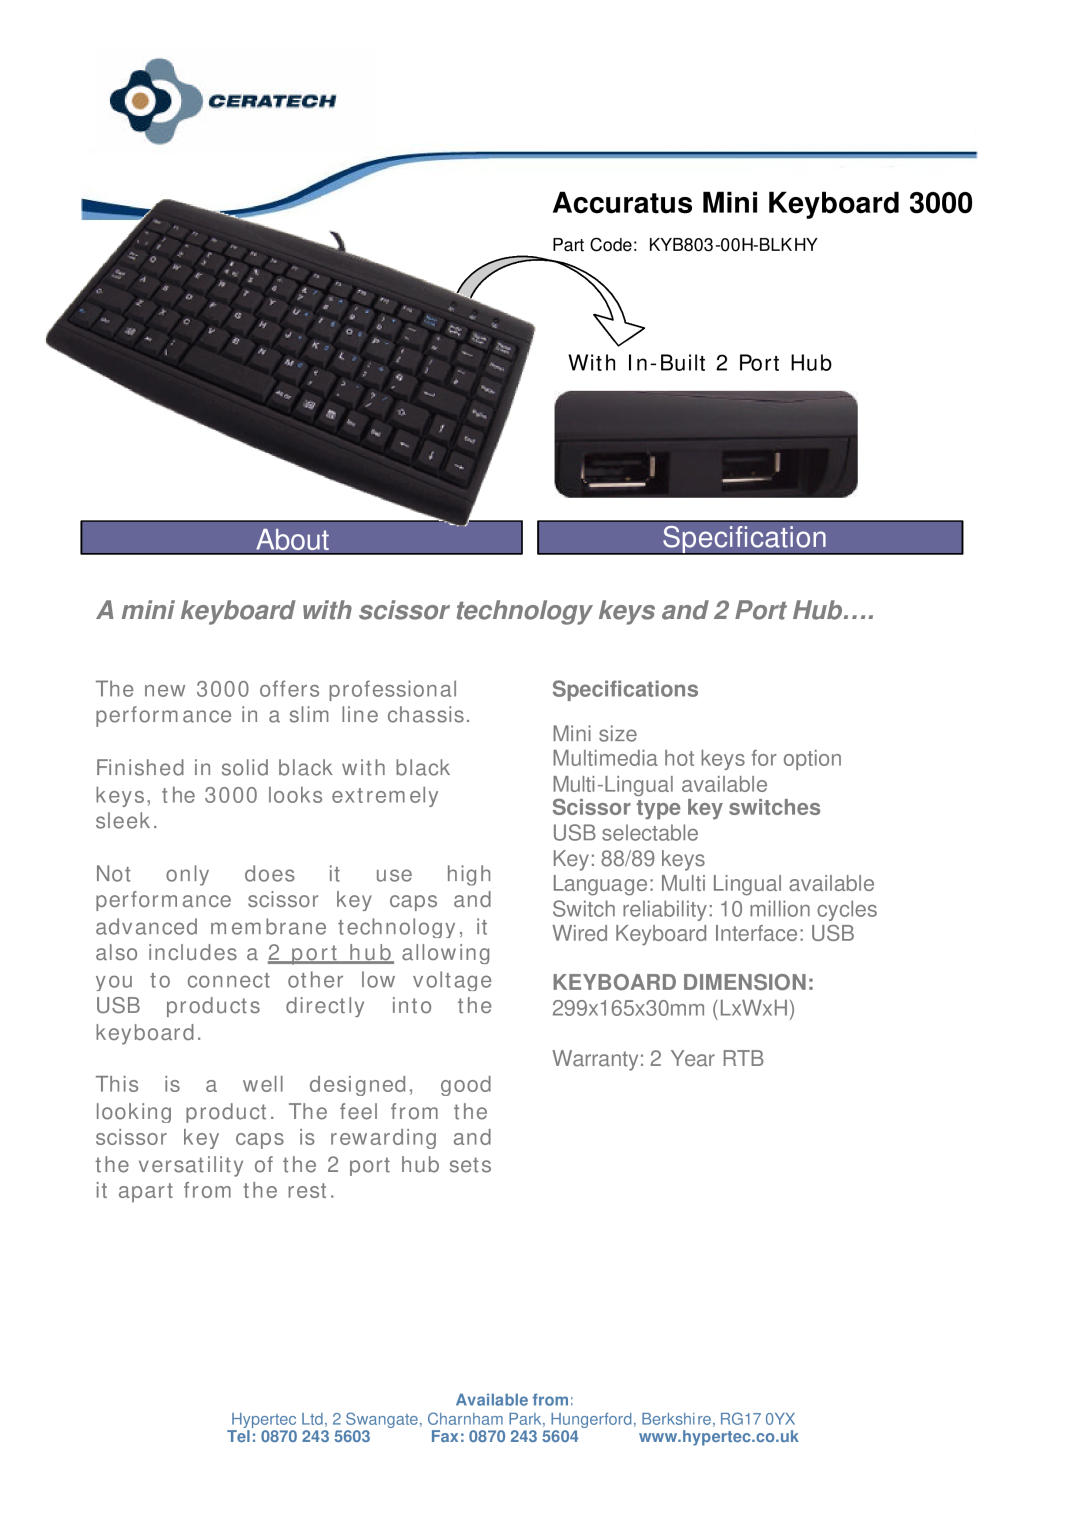 Hypertec KYB803-00H-BLKHY specifications Accuratus Mini Keyboard, About, Specifications, Warranty 2 Year RTB 